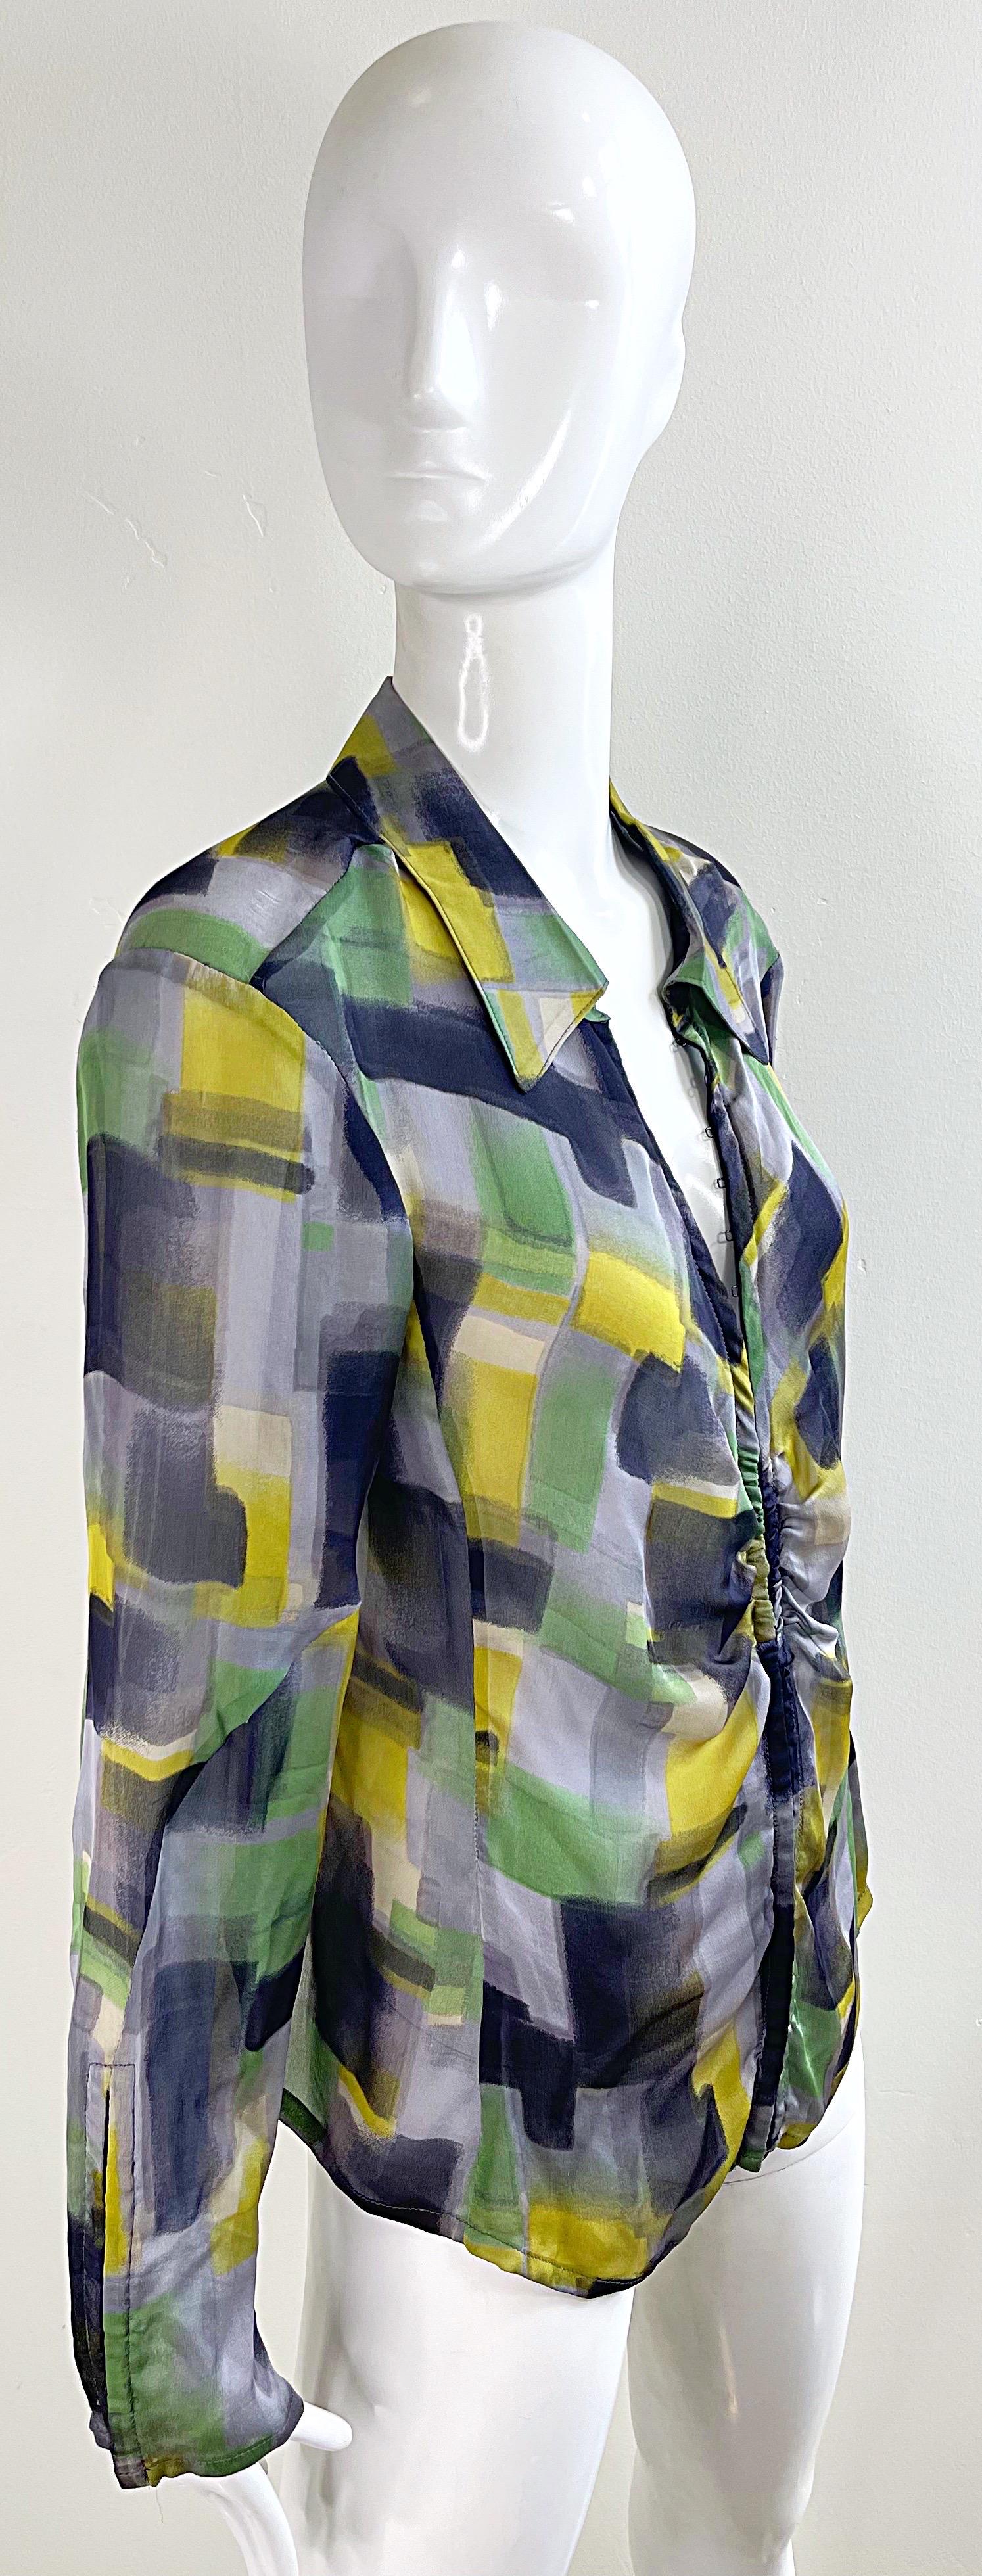 NWT Zenobia Saks 5th Avenue Size 12 Sheer Silk Chiffon Abstract Print Blouse Top For Sale 11